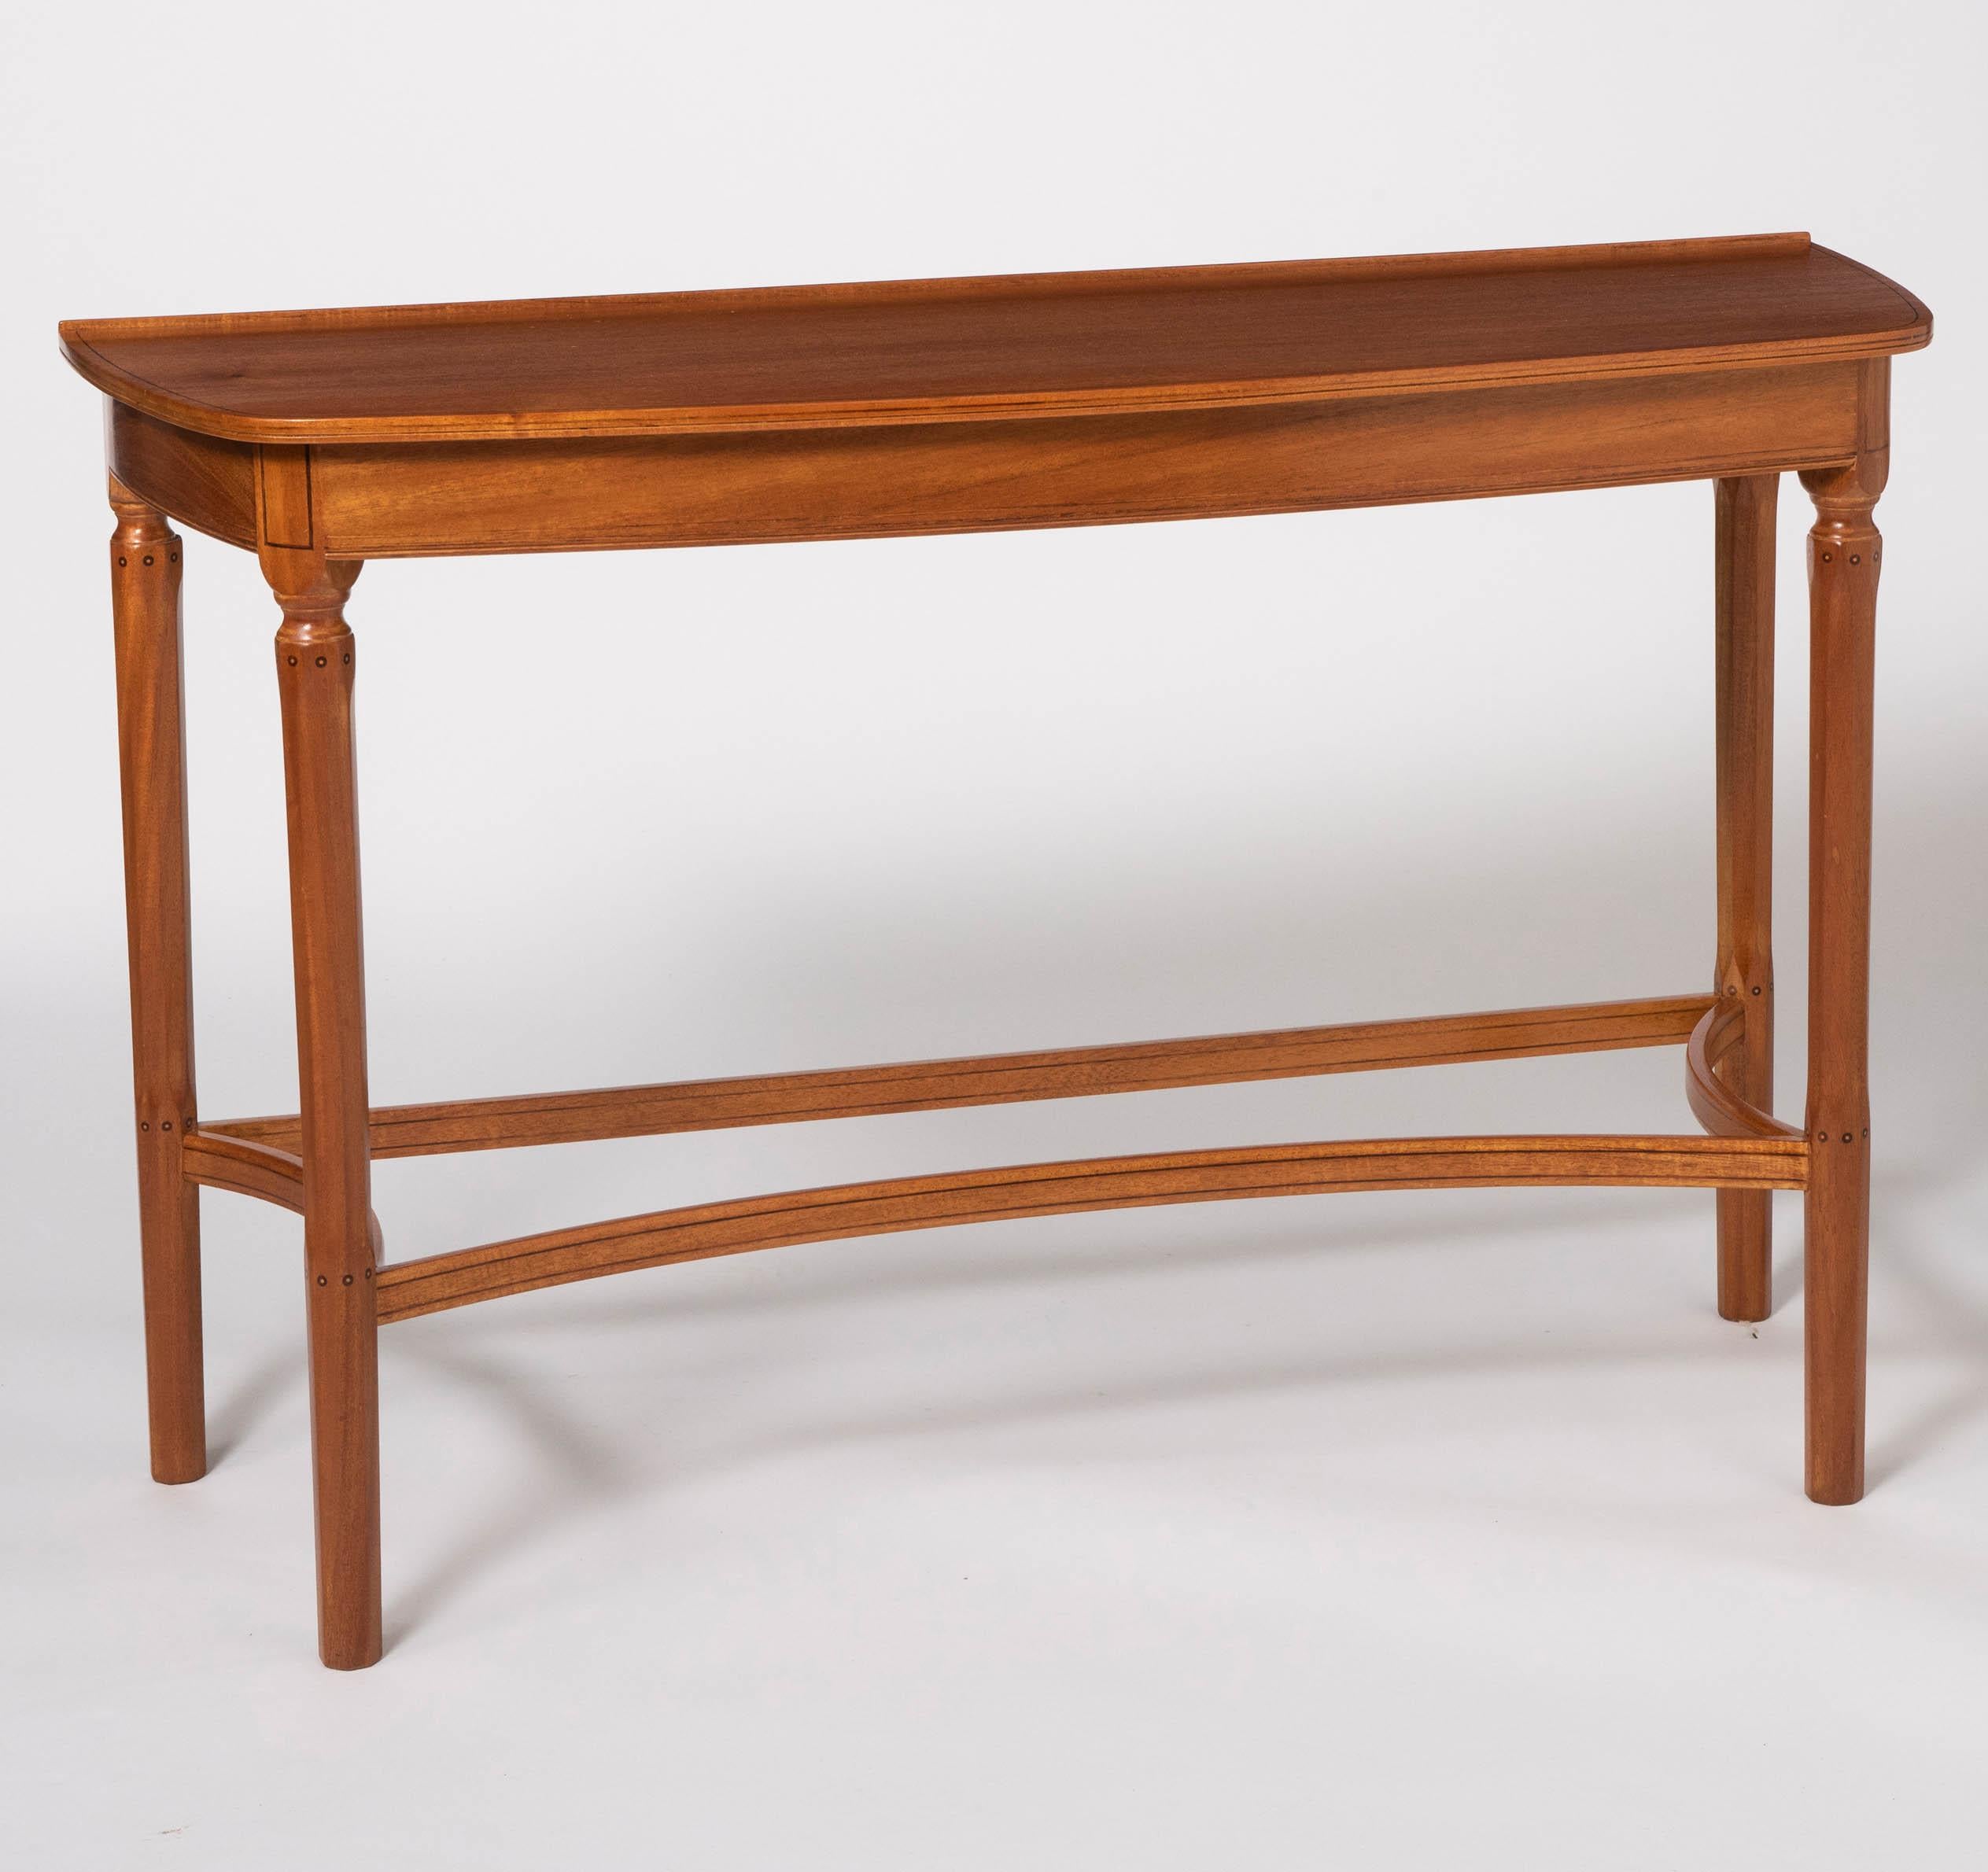 A pair of side tables by Edward Barnsley
African mahogany with Holly stringing.
The “D” shaped tops on octagonal turned legs inlaid with small marquetry roundels joined by inswept stretchers.
The tables were made for the anti-room and designed to